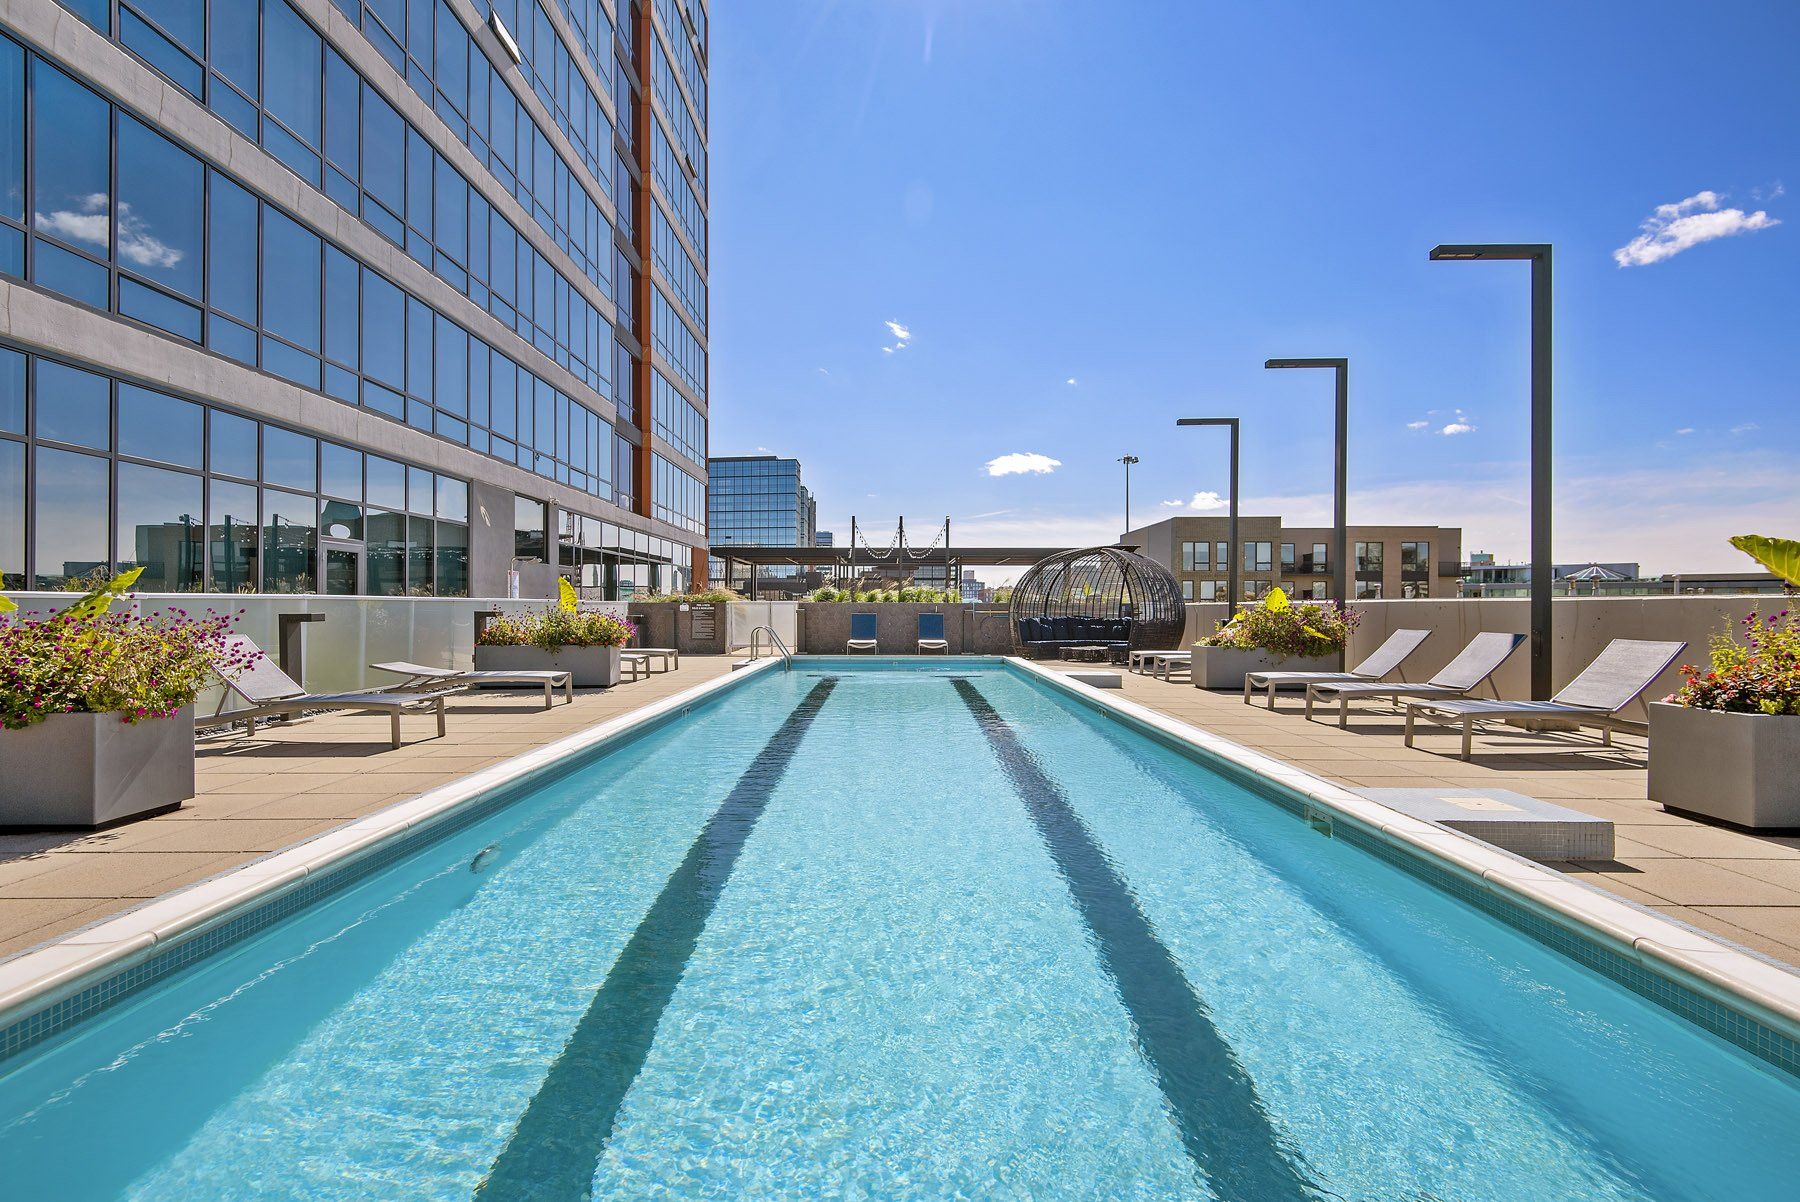 A large swimming pool is surrounded by chairs and a building at Reside on Green Street.